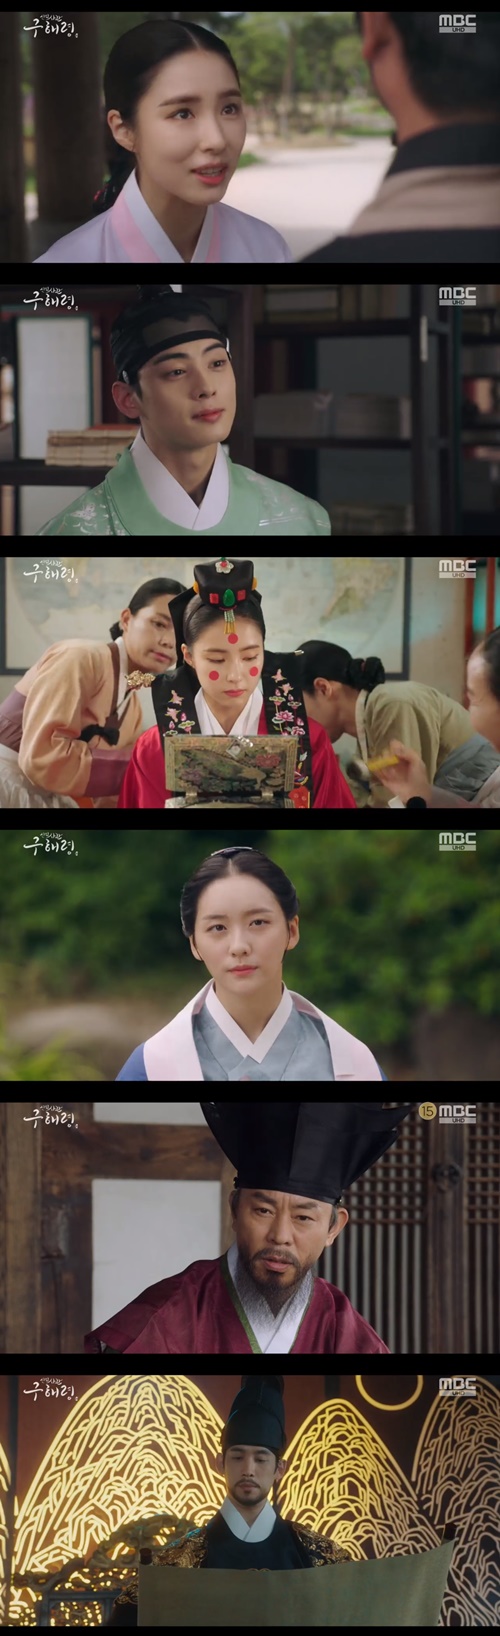 Shin Se-kyung, a new officer, challenged her at the same time without knowing anyone.In the New Entrepreneur Gu Hae-ryong broadcast on the 18th, Gu Hae-ryong (Shin Se-kyung) was shown to hold the wedding ceremony behind her and to hold her farewell poem.Lee Rim (Cha Eun-woo) noticed that Koo Hae-ryeong had acted as his own, and Lee told Koo Hae-ryong, The same was true of you, who had no head; a fraudster who makes money by posing as a plum.I was a plum artist, said Gu Hae-ryong, and was it a plum artist. Lee said, What is so proud of the subject of fraud?I am not the only one to be sorry, Irim said to the readers who came to see the plum. The hearts of those people are the truth.I am not a plum, but I pretended to be a plum, and I deceived you. He bowed to his readers, saying, I am sorry.The real plum teacher is coming, he said.Suddenly, the money department said, Take the plum and confiscate the book.So Irim was in danger of being caught, but it seemed that he was saving Lee from the Danger because he showed his base.But when he became dangerous to himself, he eventually pushed him away and ran away. He was imprisoned for a while and vowed to revenge him.Heo Sam-bo (Sung Ji-ru) saved Lee Lim from the Danger, falsely claiming that he was a plum to save Lee Lim.Gu Hae-ryong told Min Woo-won (Lee Ji-hoon) that he did not say a word while taking away the books he had collected for the rest of his life.I need to know what kind of reason I have taken people and whether I have searched the private house. Min Woo-won said, There was a name for smuggling books to disturb the river. Koo Hae-ryong rebelled against this and said, I hate the people who are now in the house and like to hate and hate.Lee Tae (Kim Min-sang) was angry when he found out that Irim had written a love story. He called Irim and said, How do you feel when you are praised by the foolish people for this ugly thing?Id rather play, he said angrily.Lee said, It is a book written to appease the right mind. However, Lee gave instructions to burn all the things related to the book, paper, brush, etc. of the bookstore.Irim was eager to take his name, but Itae was straight.I will do my best to do my best, said Sahee (Park Ji-hyun), daughter of Lee Cho Jeong-rang, who visited Min Ik-pyeong (Choi Deok-moon) saying, I need help to do so.The day of the wedding came, and the old man, who had no desire to marry, secretly fled from Koo Jae-kyung (Fairy Hwan). The place where Gu Hae-ryeong arrived in a breathtaking run was the place where she took a farewell visit.On the other hand, New Entrepreneur Koo Hae-ryong is broadcast every Wednesday and Thursday at 8:55 pm.Photo MBC broadcast screen capture